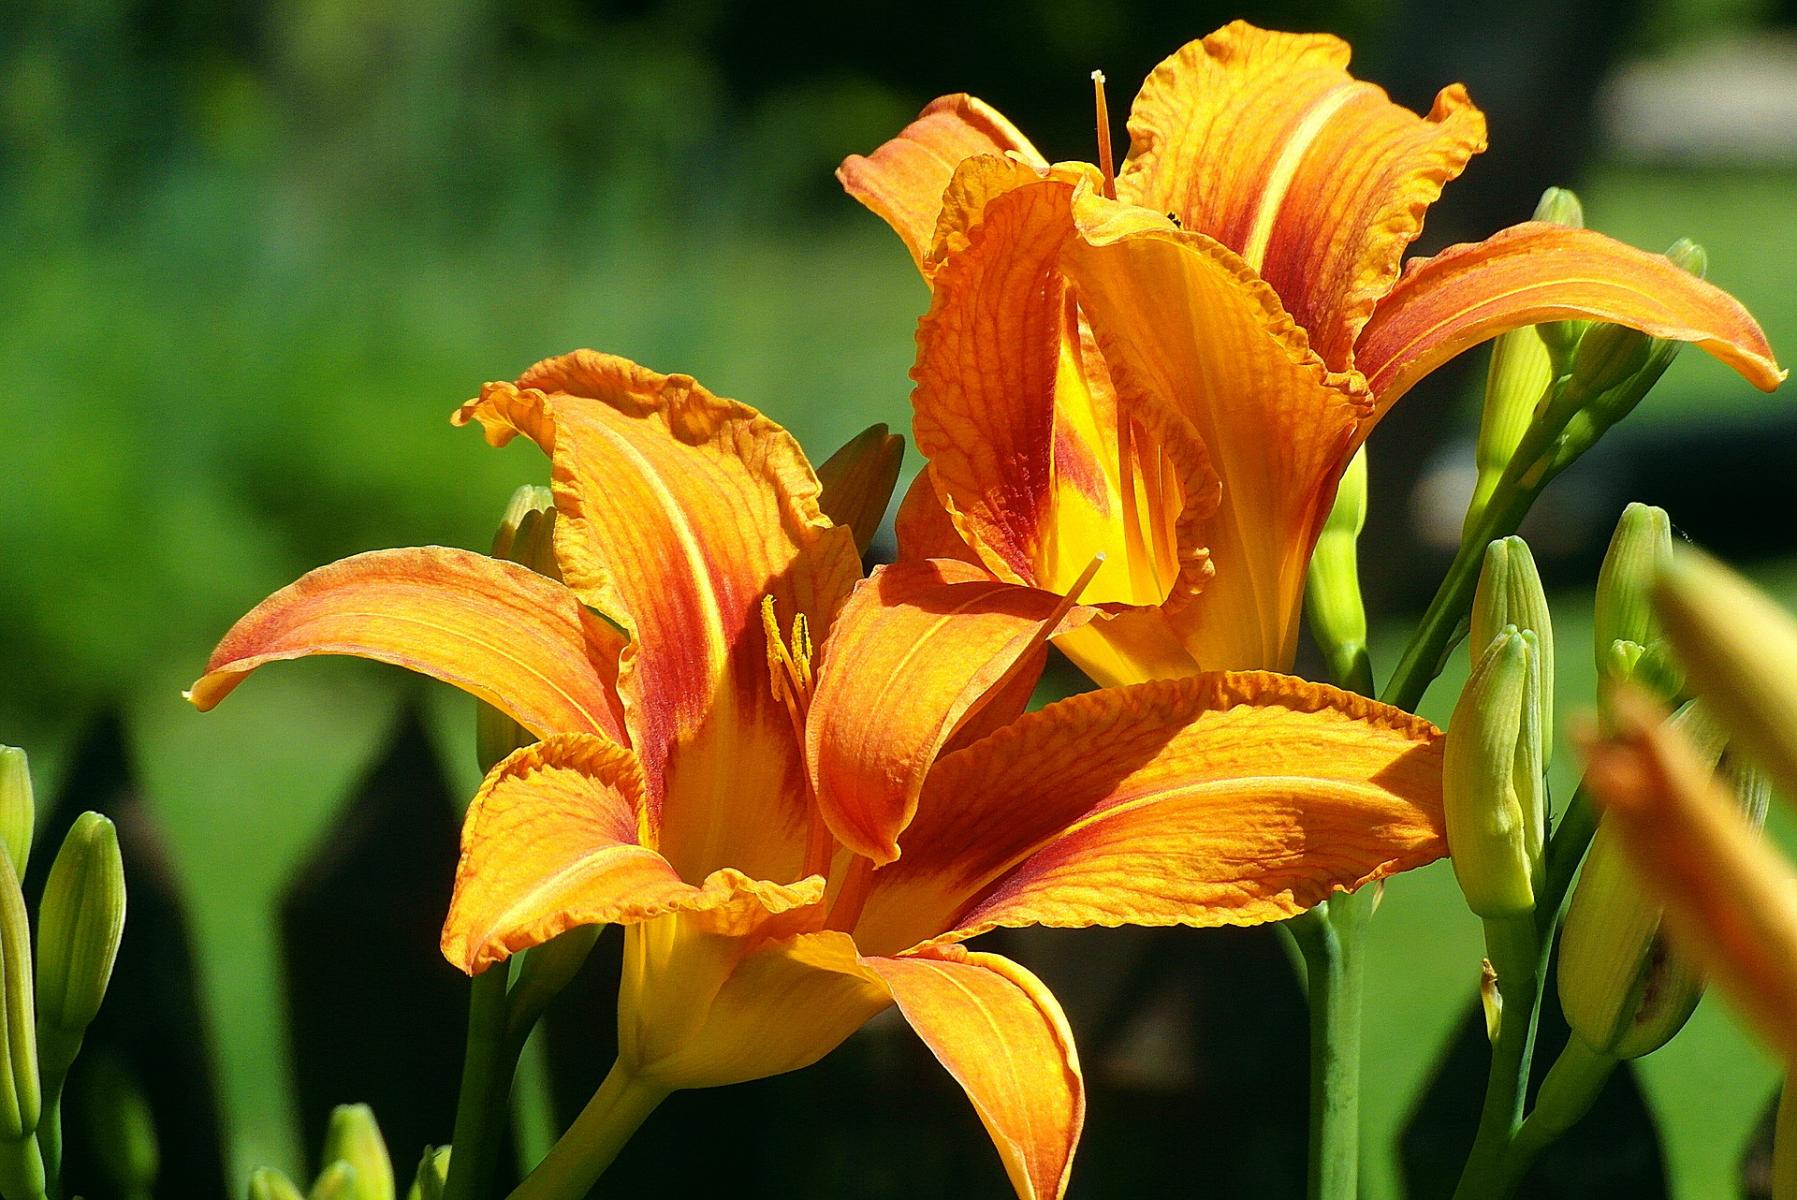 Sun-loving plants like daylily grow and bloom best in full sun.